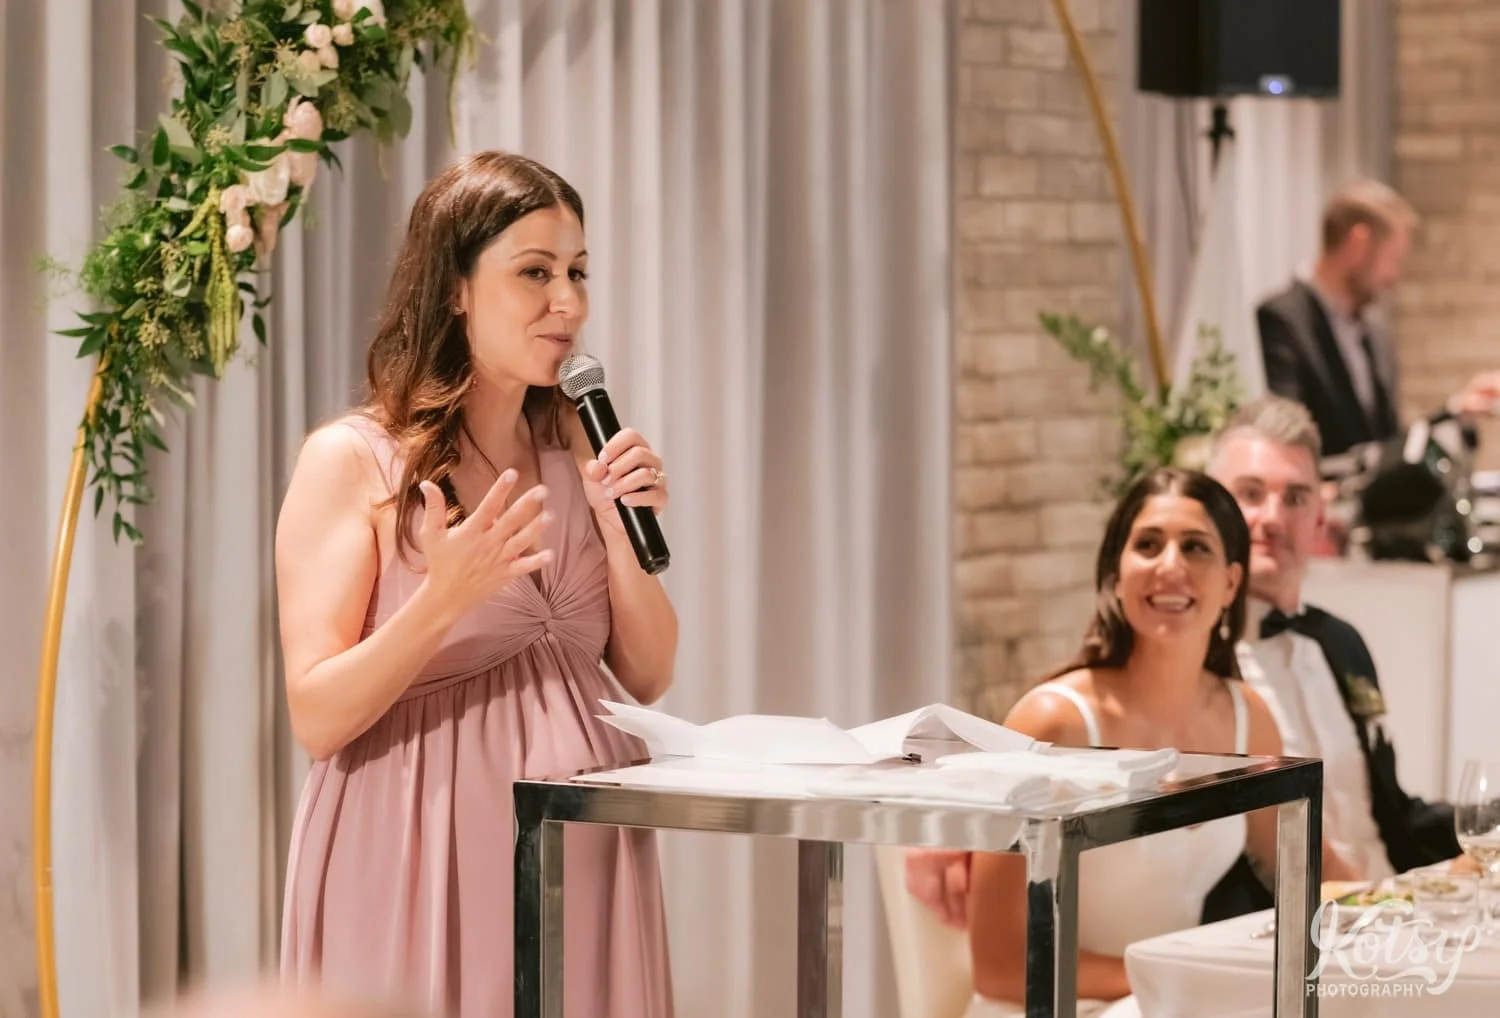 A woman in a pink dress makes a speech while the bride and groom are seen smiling in the background. Photographed during a Village Loft wedding reception in Toronto, Canada